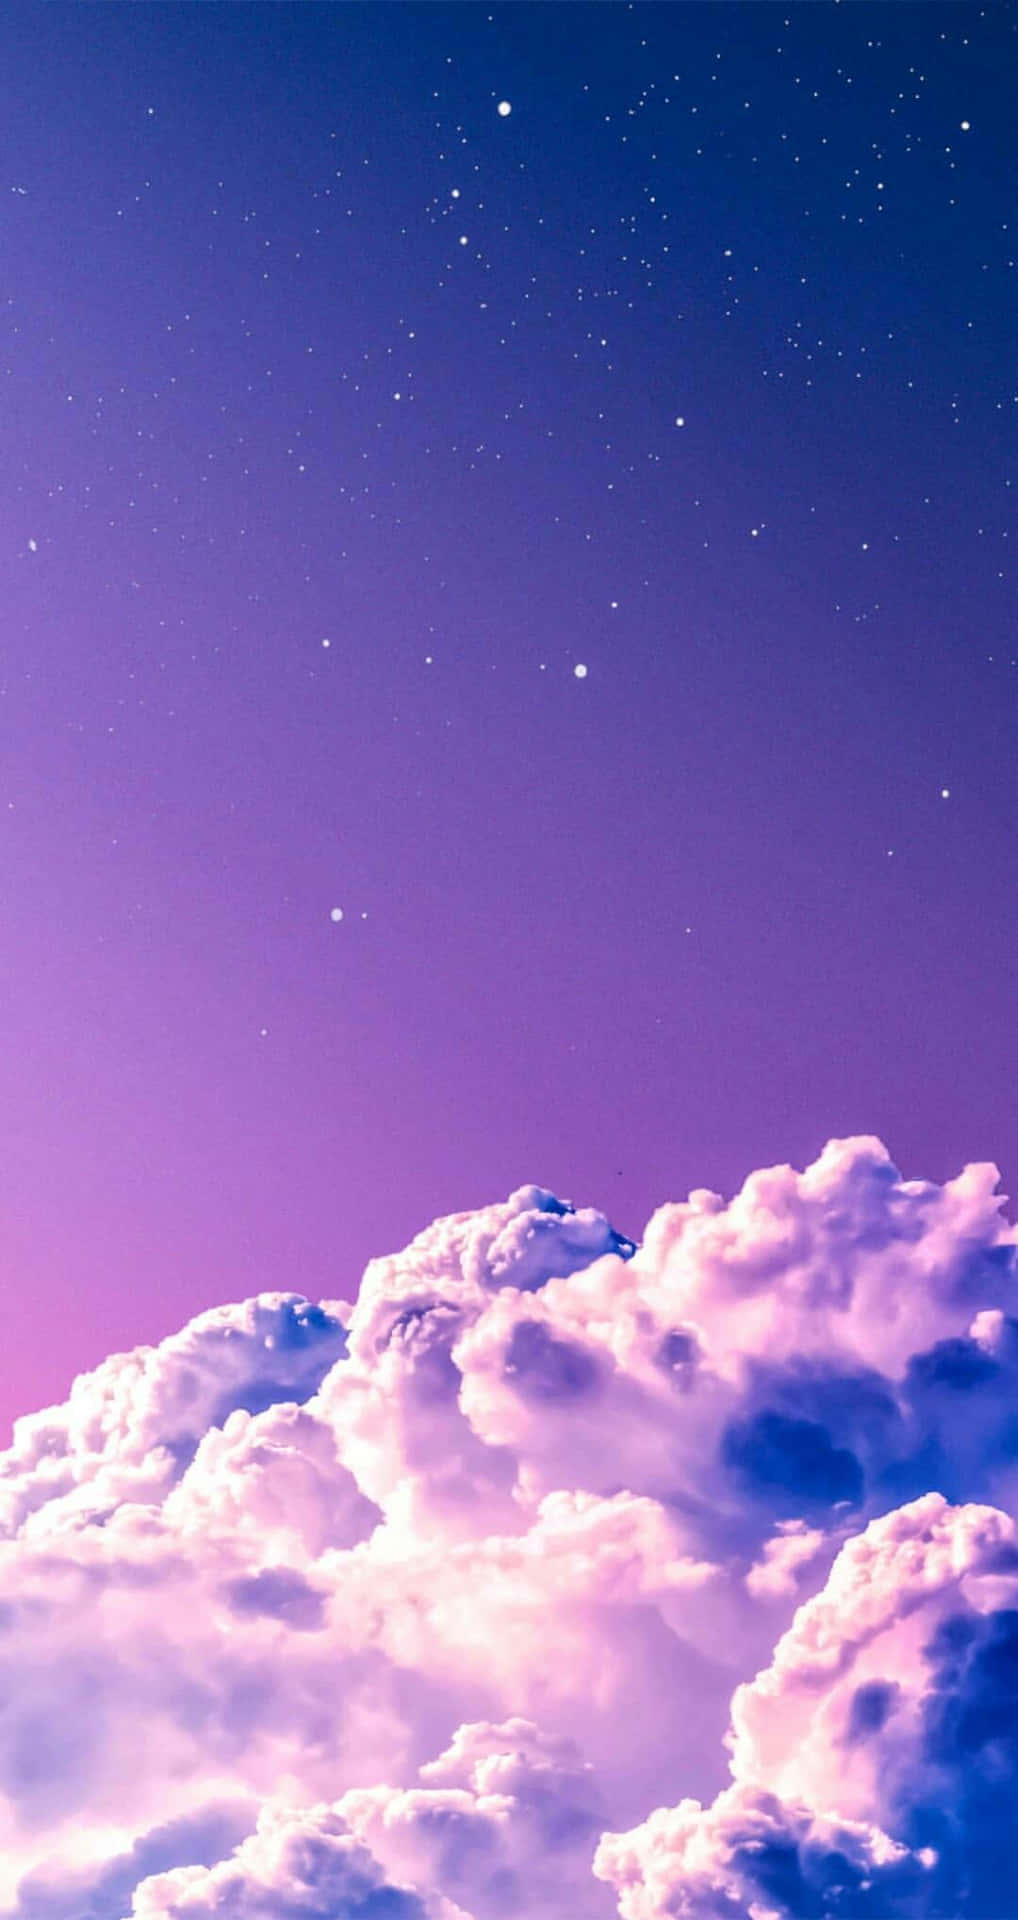 A Purple Sky With Clouds And Stars Wallpaper